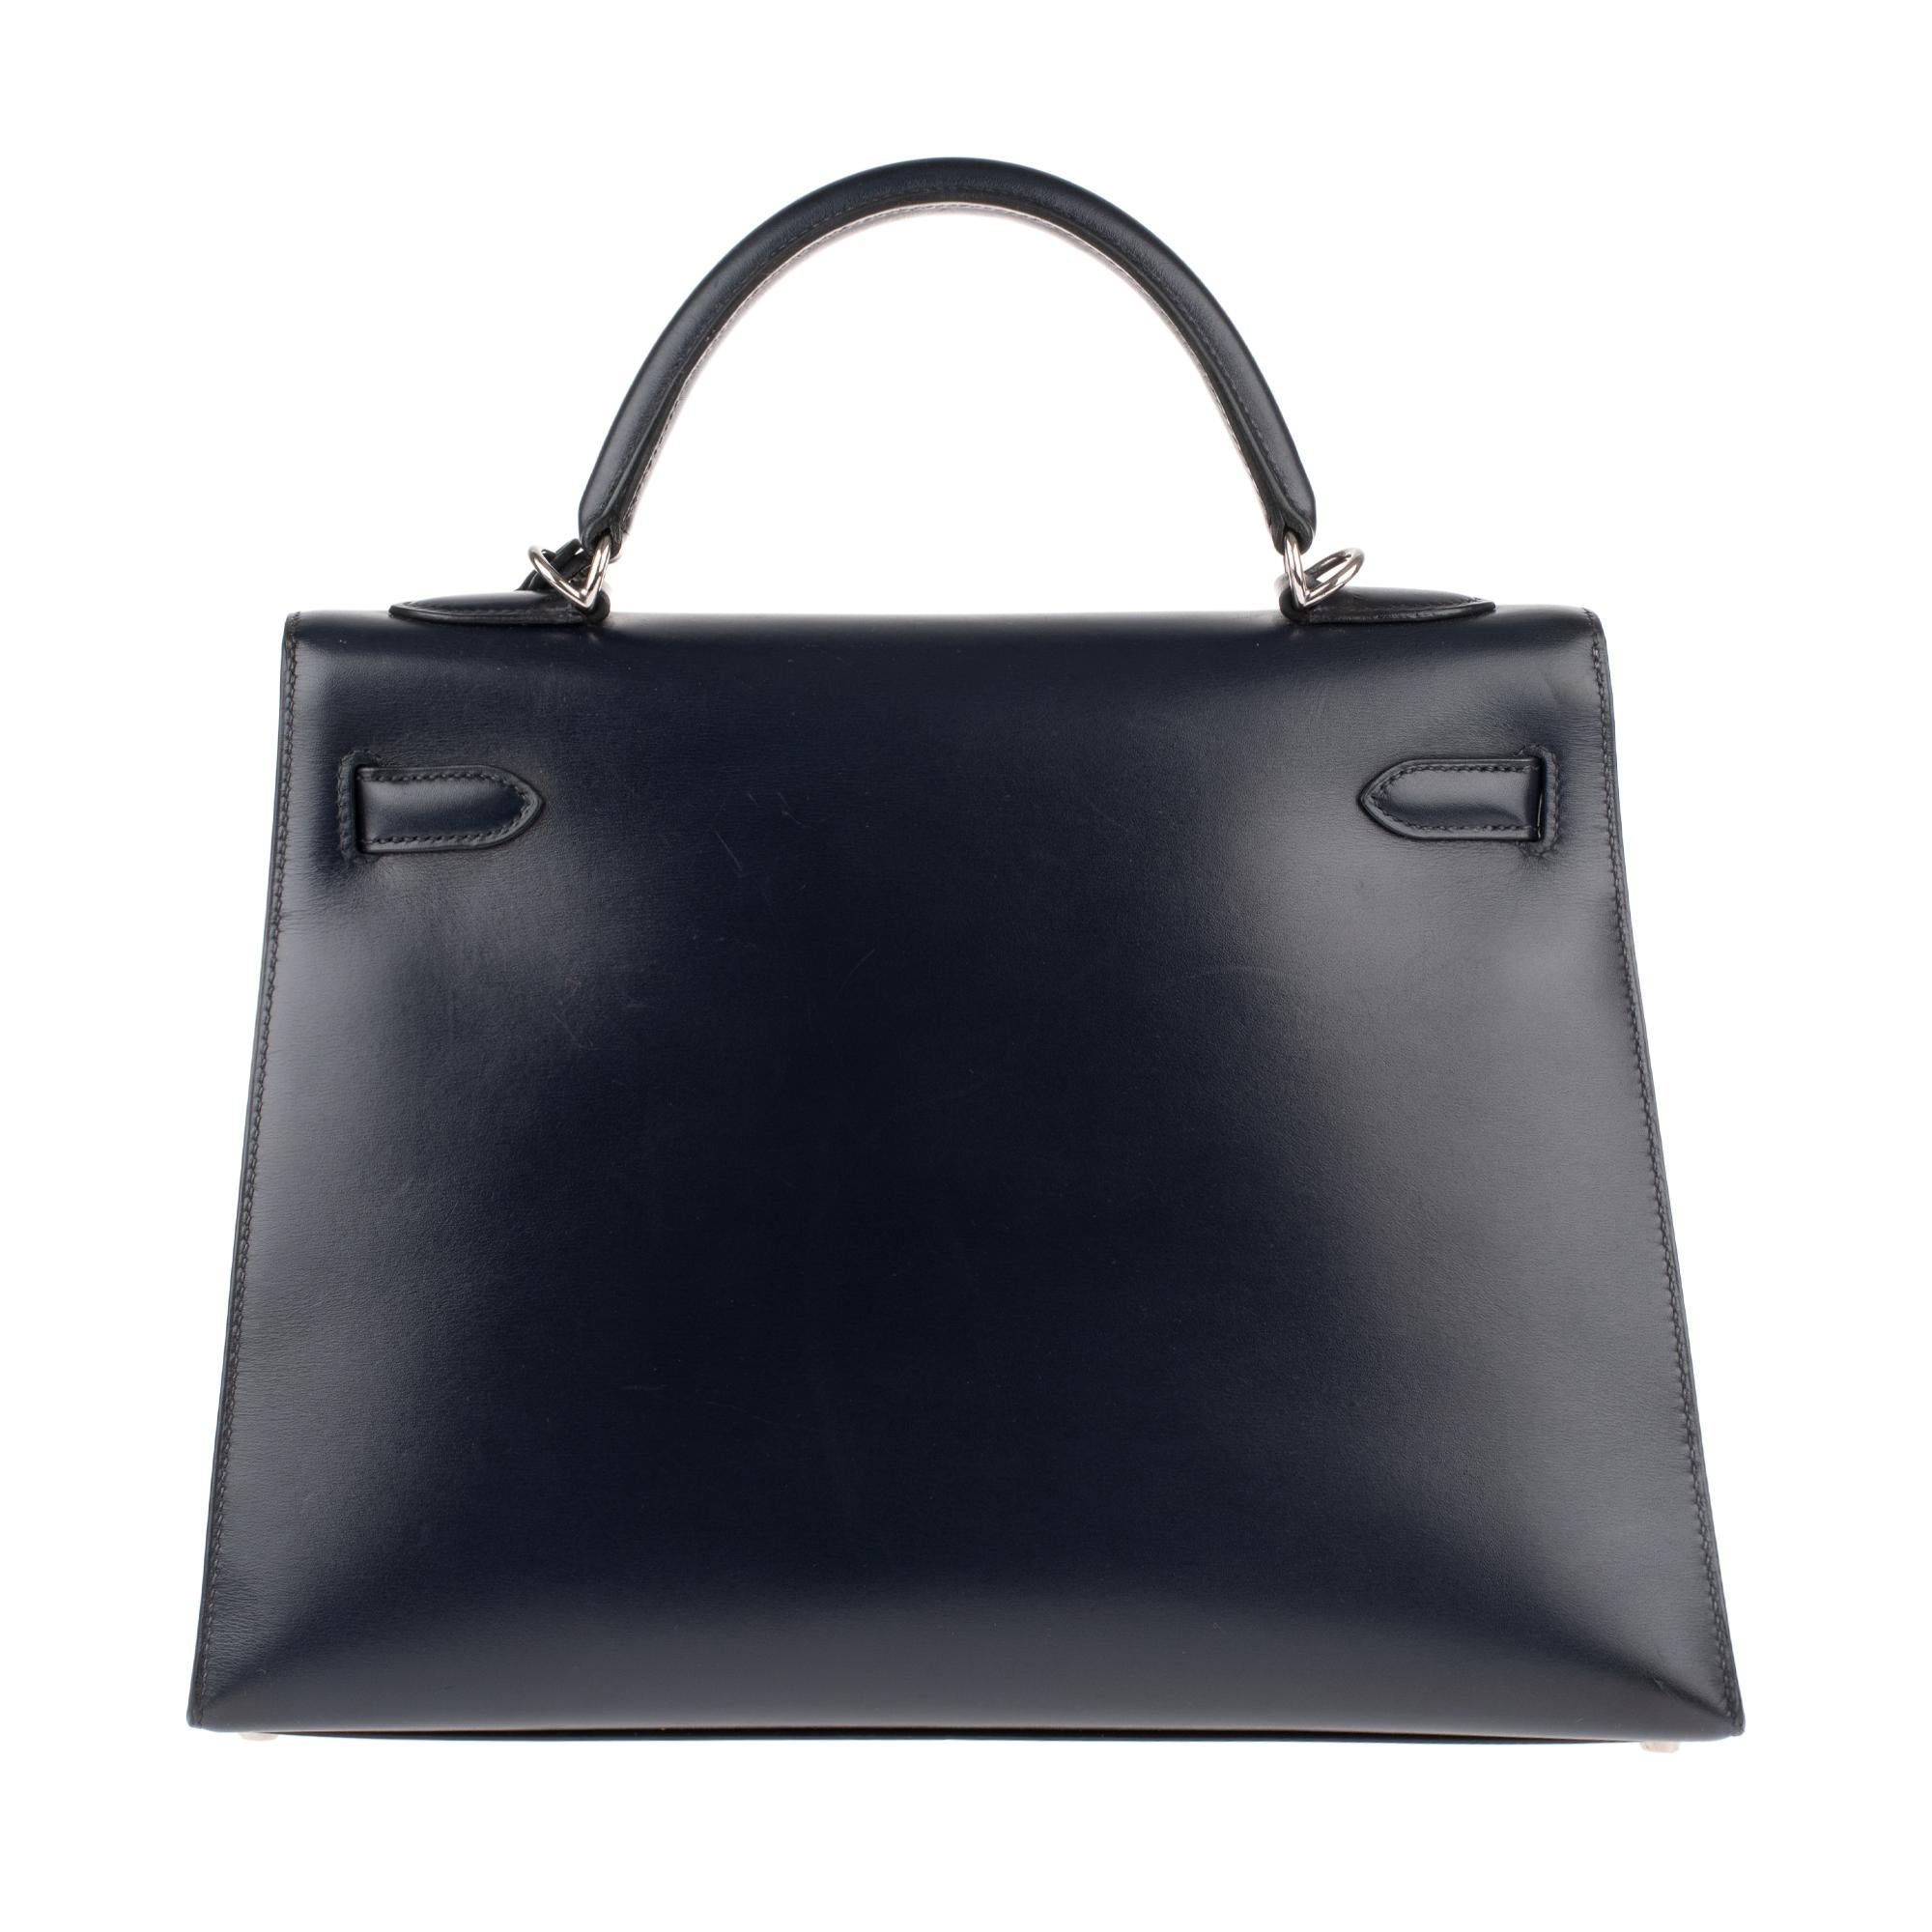 Black Collector Hermès Kelly 32 handbag with strap in navy blue calfskin box leather!